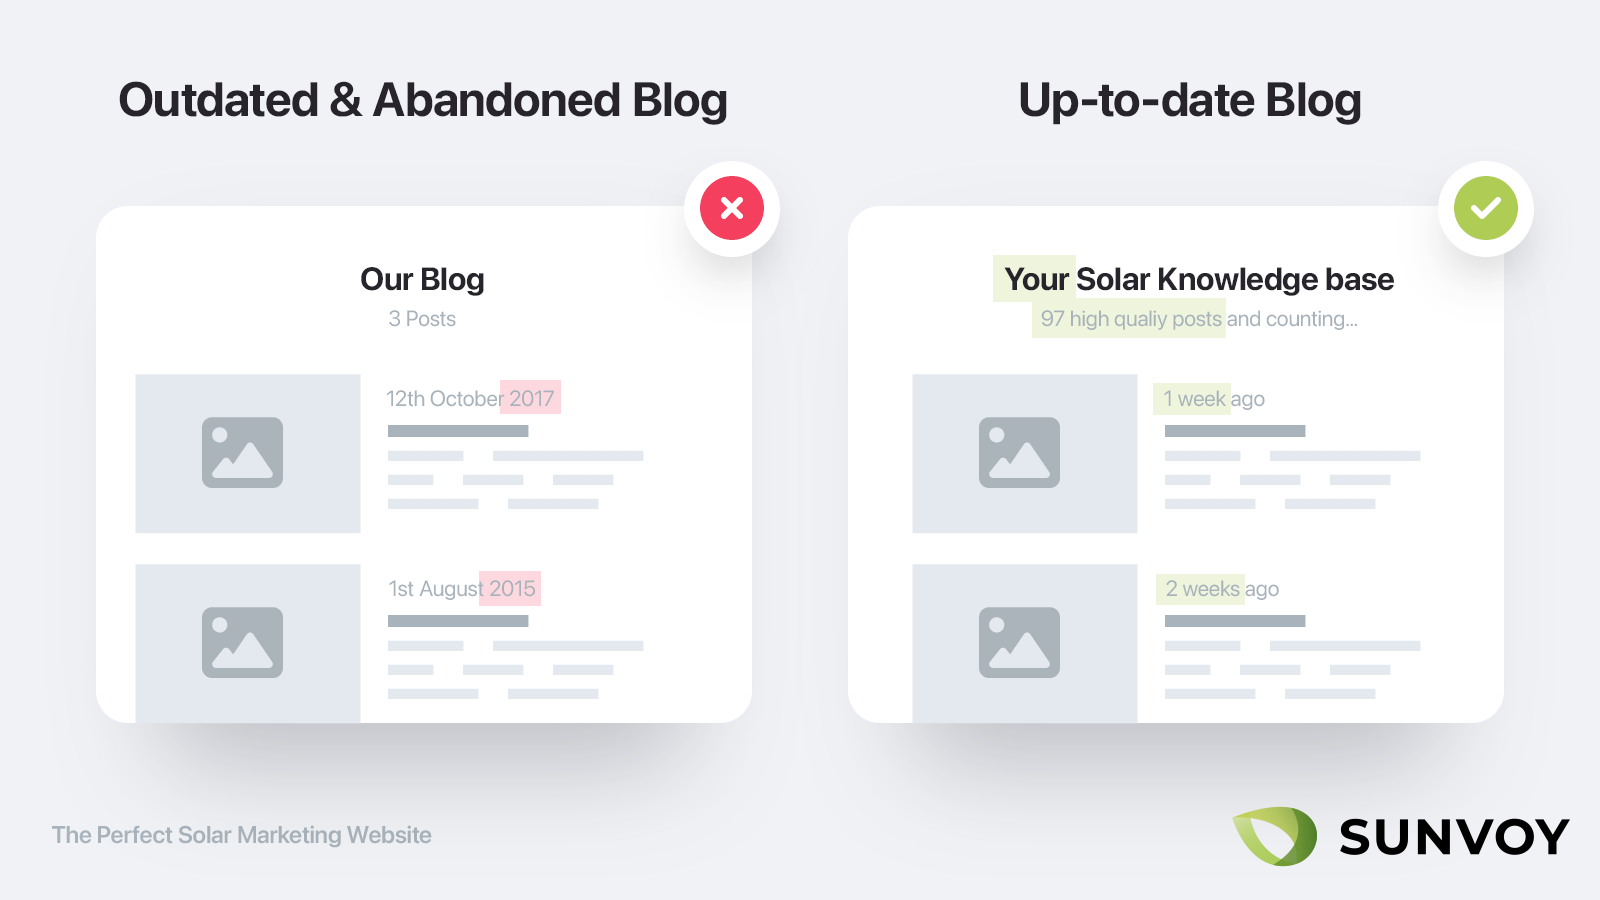 Make sure your blog is up to date